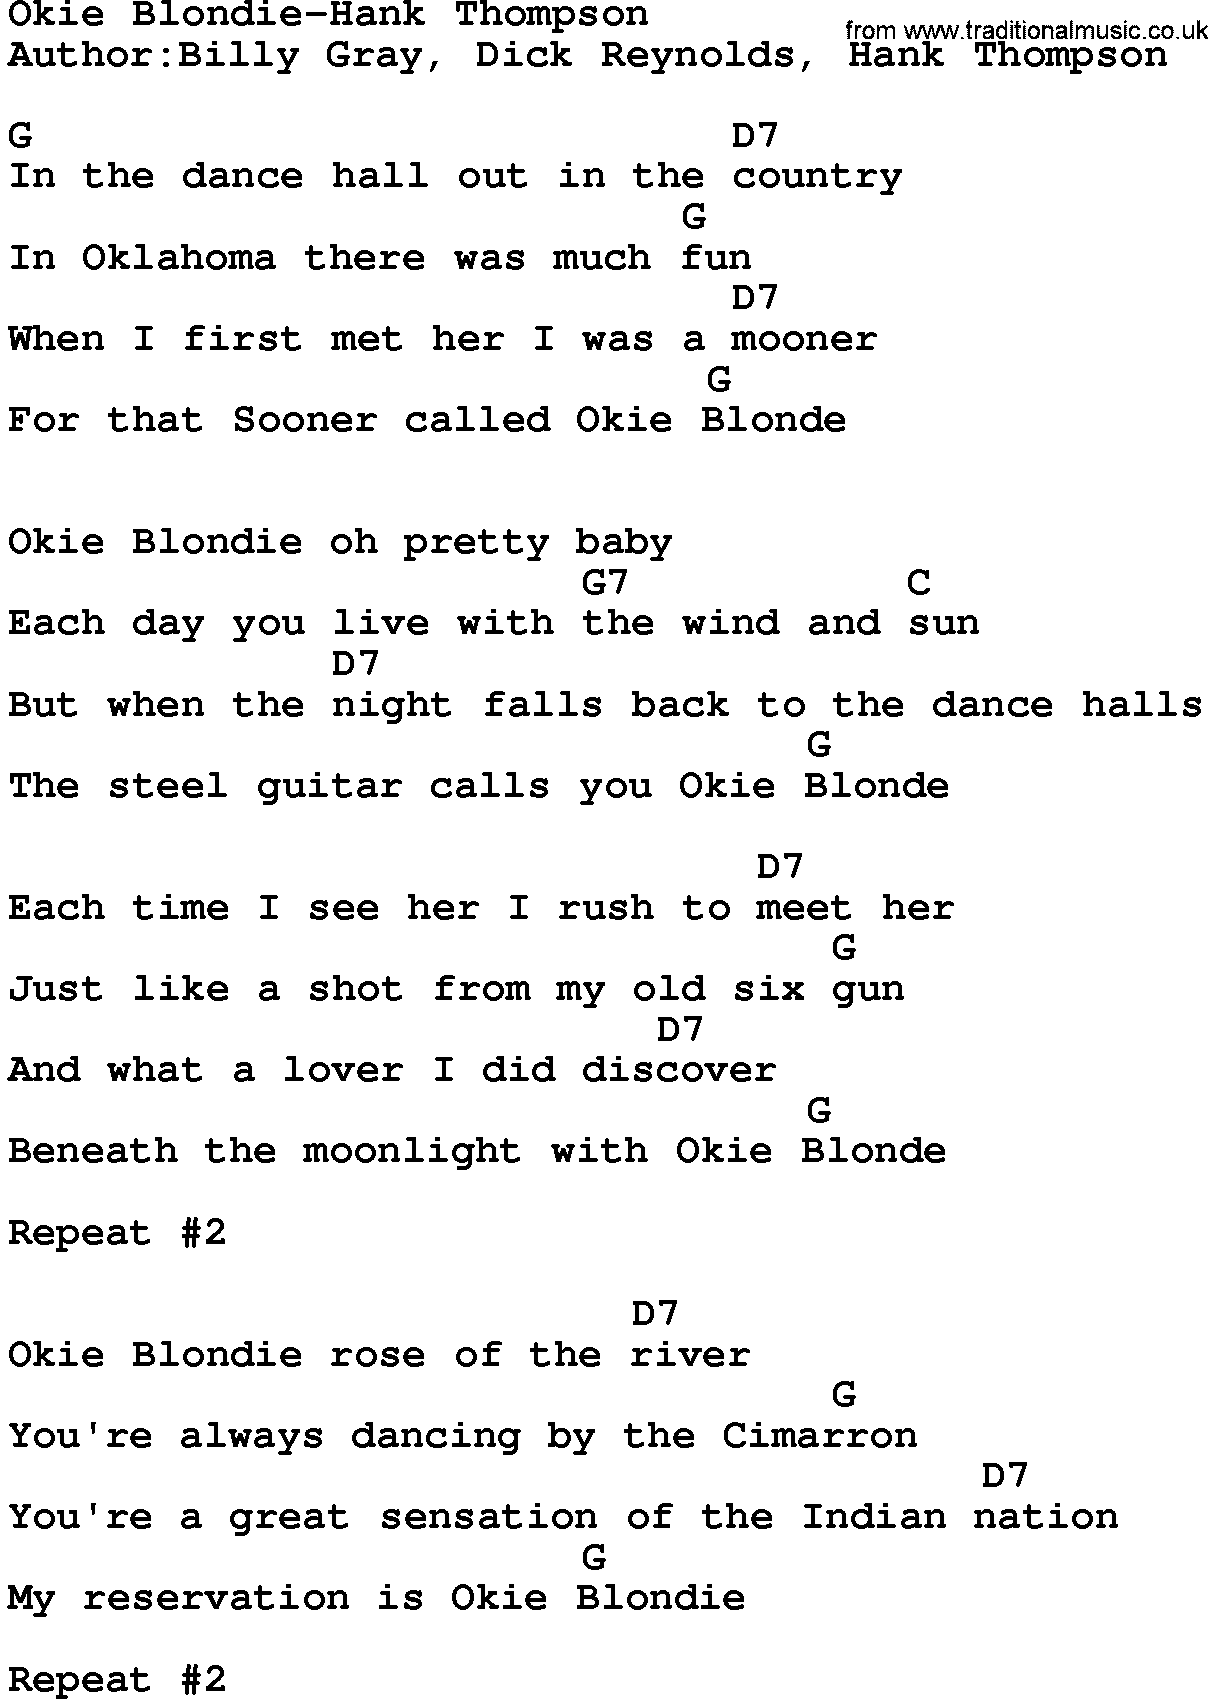 Country music song: Okie Blondie-Hank Thompson lyrics and chords